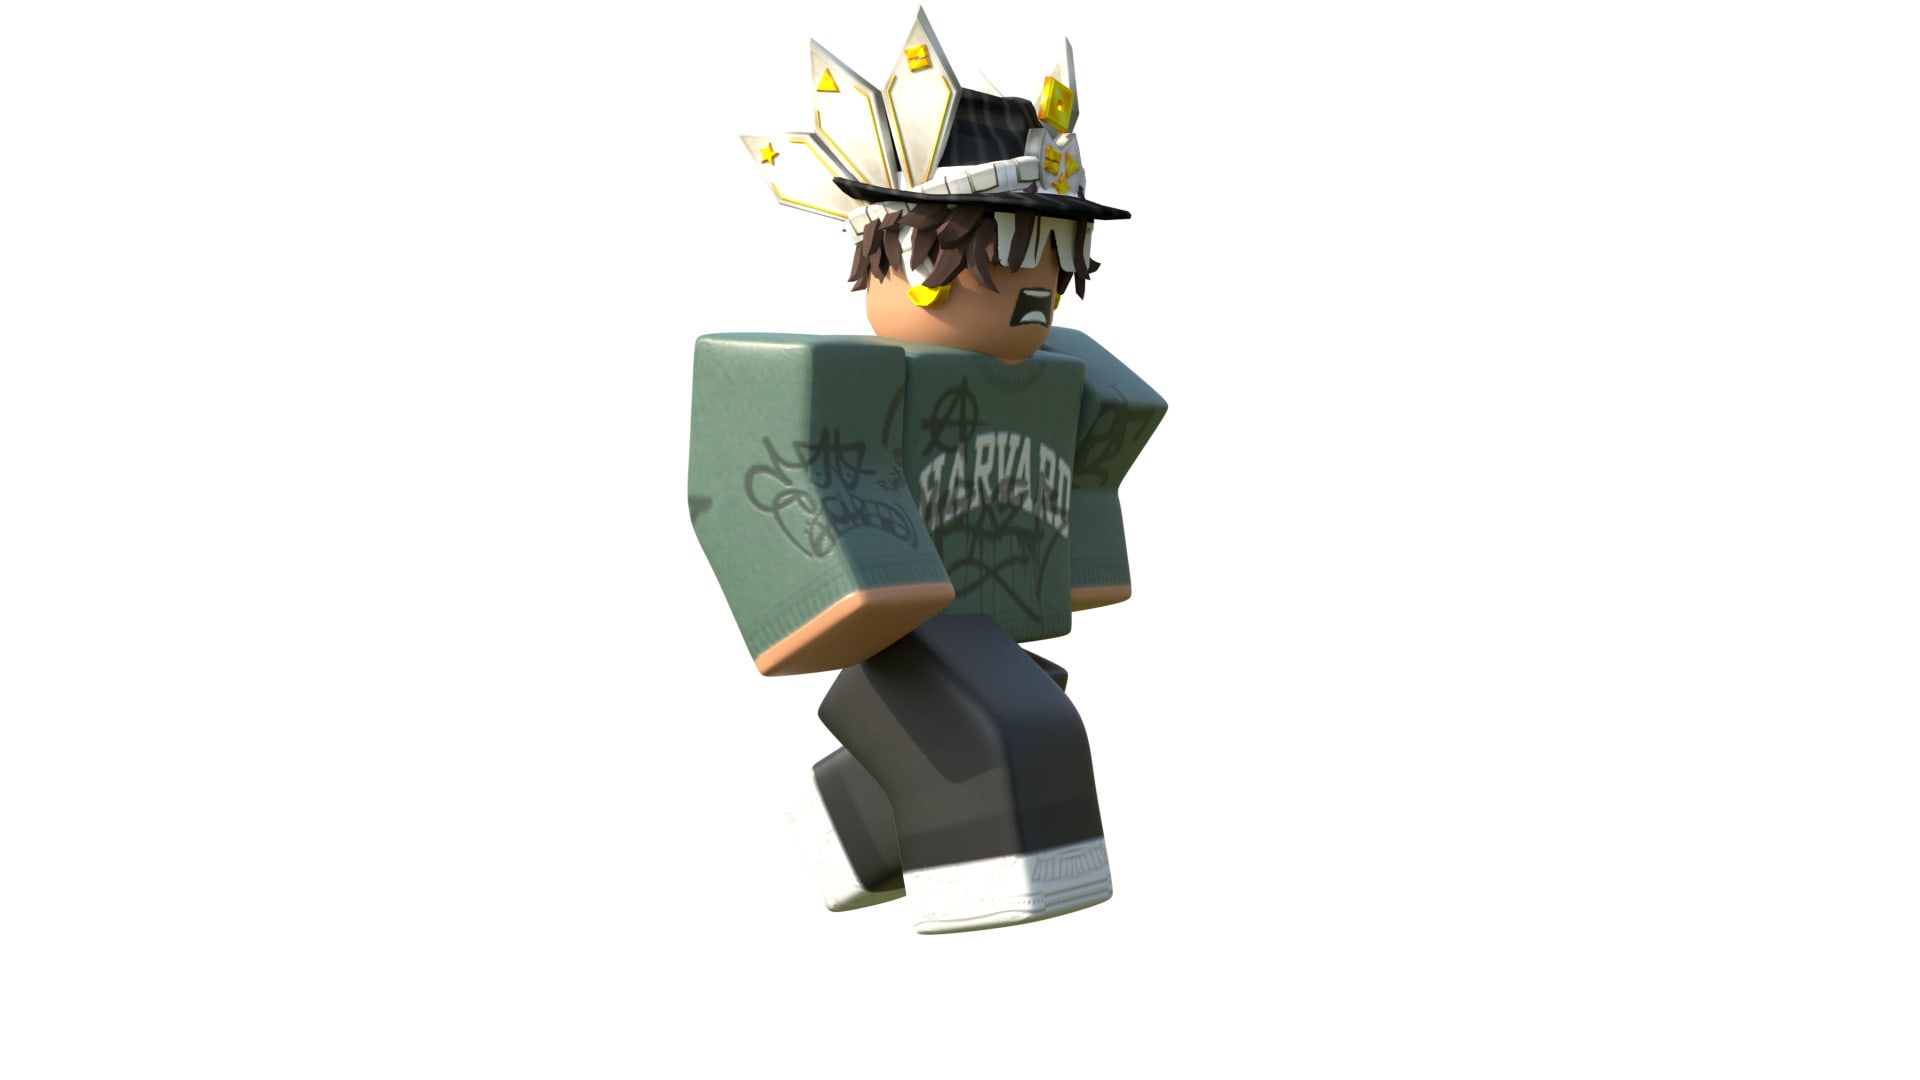 Pin by Roblox professional GFX maker on Funny Roblox things